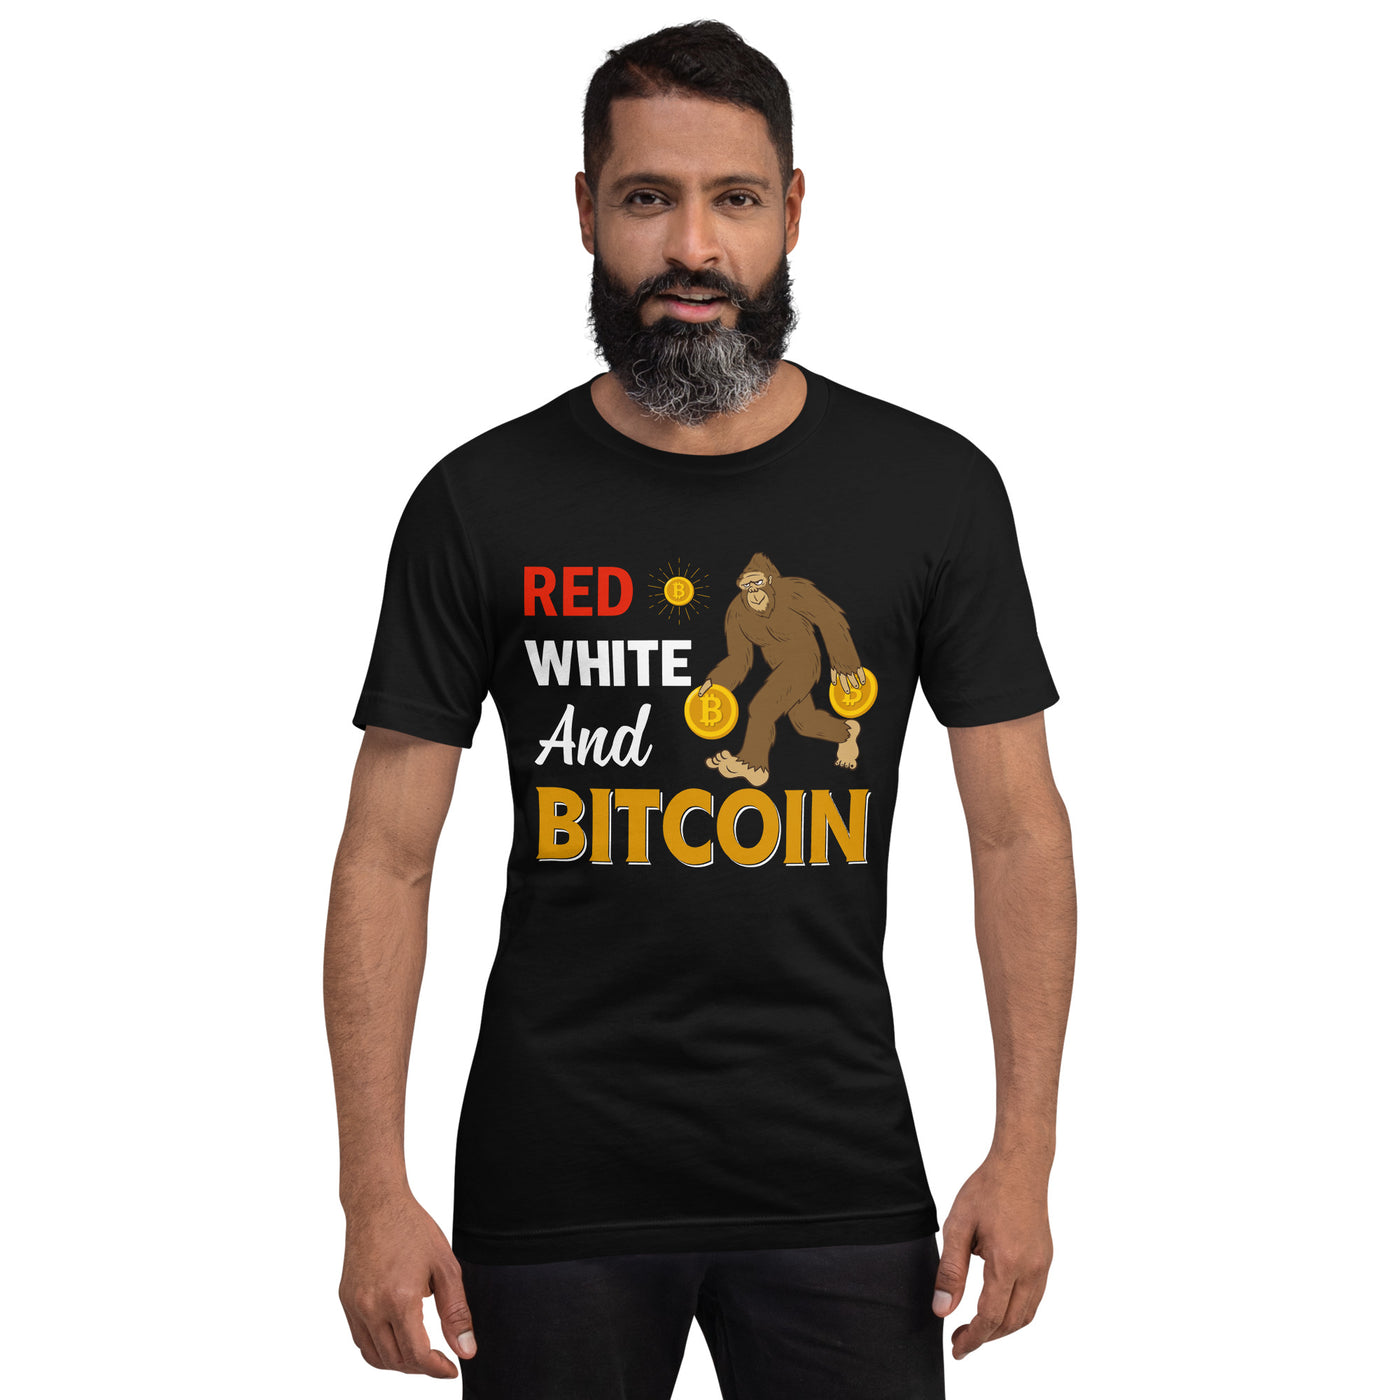 Red, White and Bitcoin - Unisex t-shirt